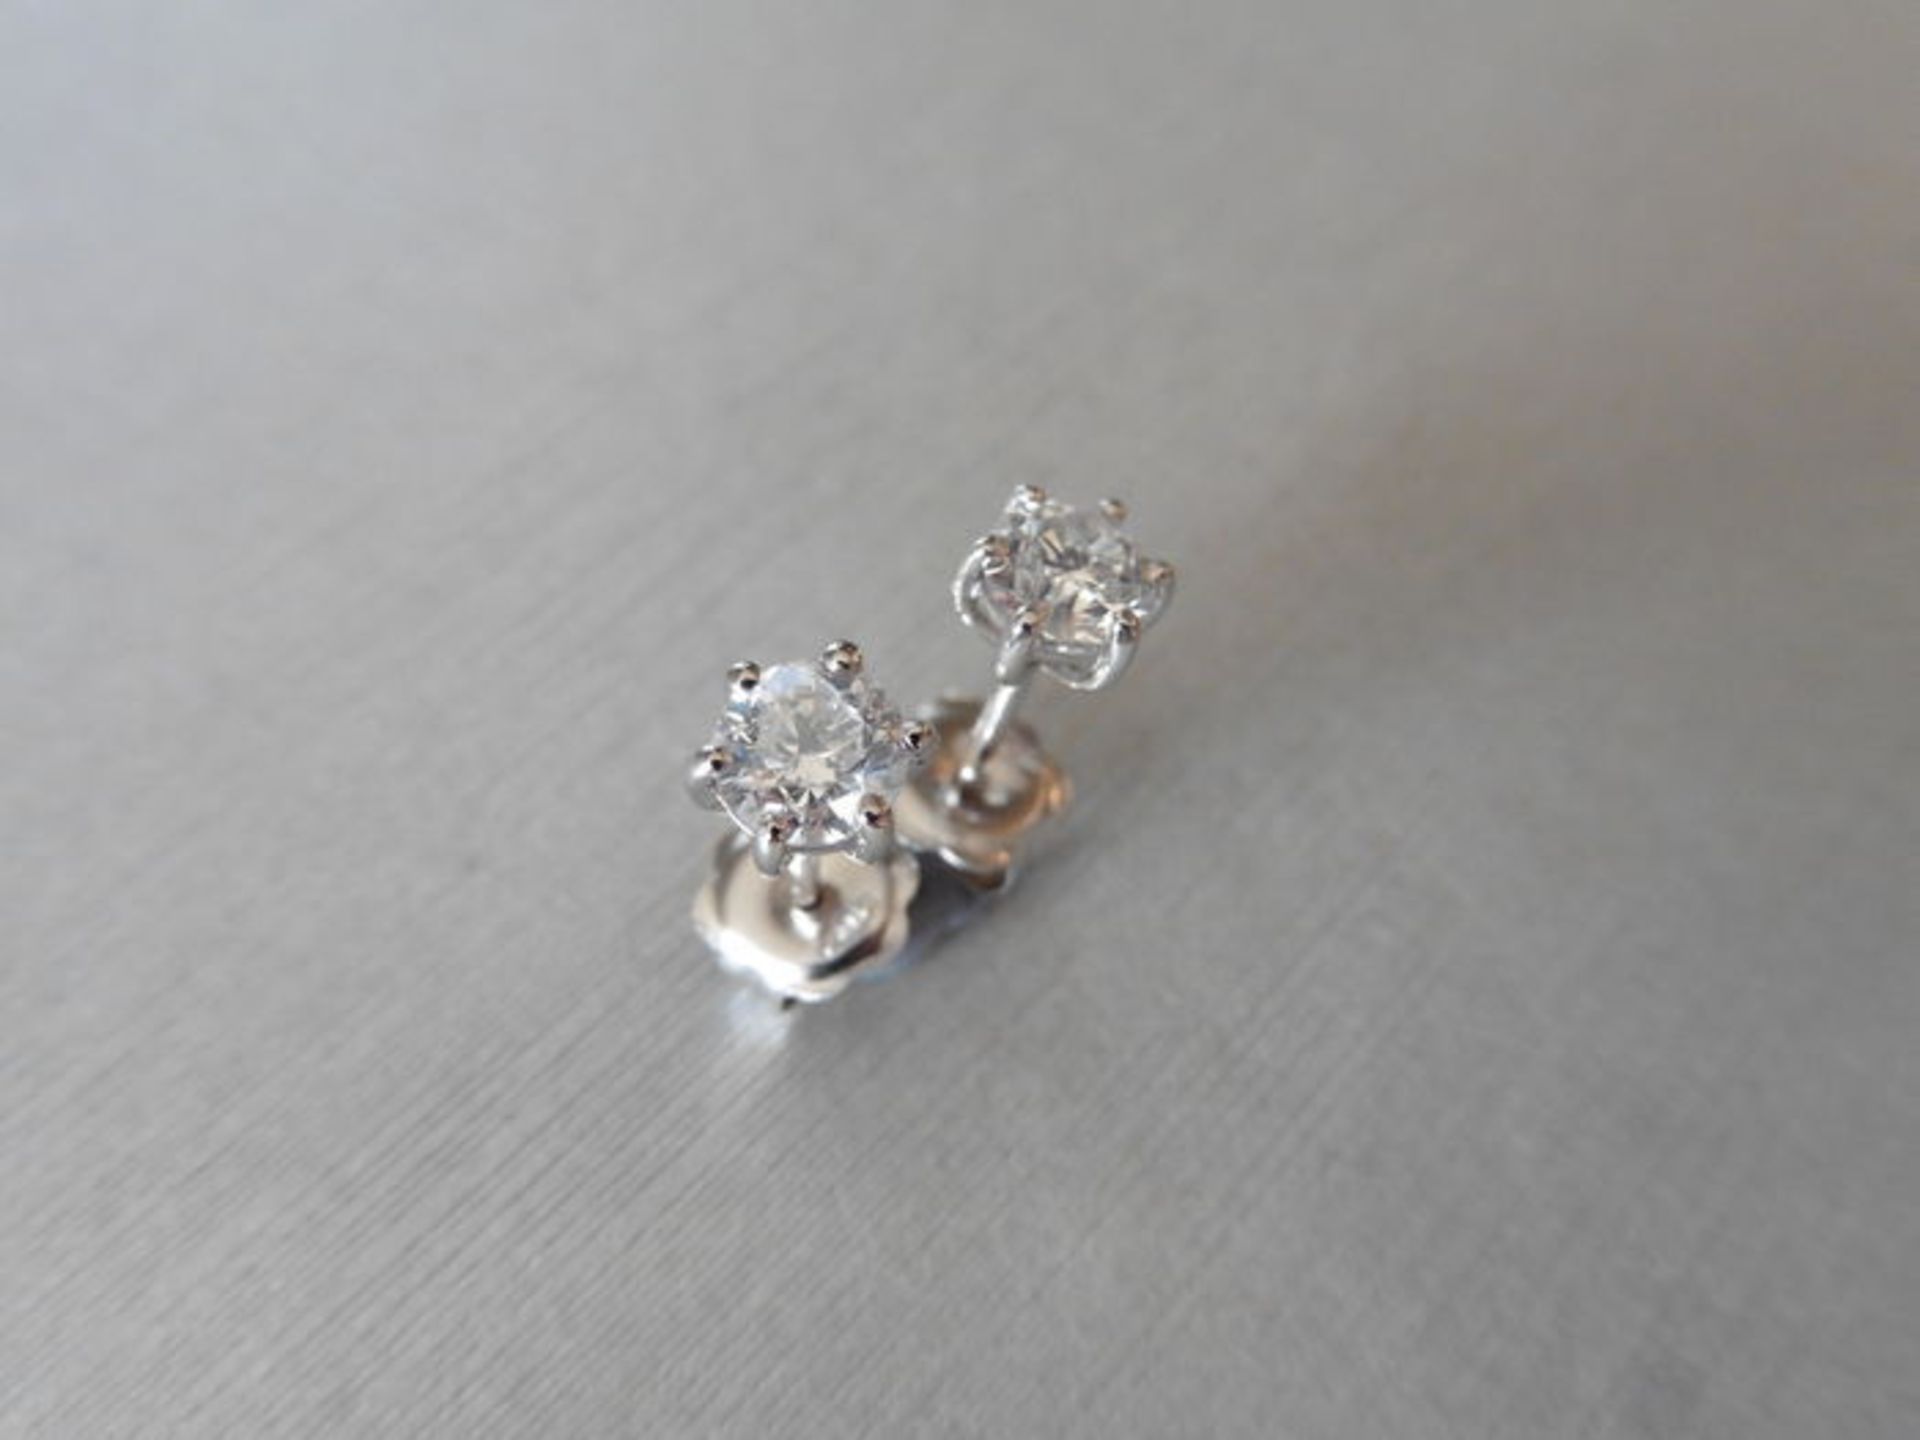 1.00ct Diamond solitaire earrings set with brilliant cut diamonds, I colour SI2 clarity. Six claw